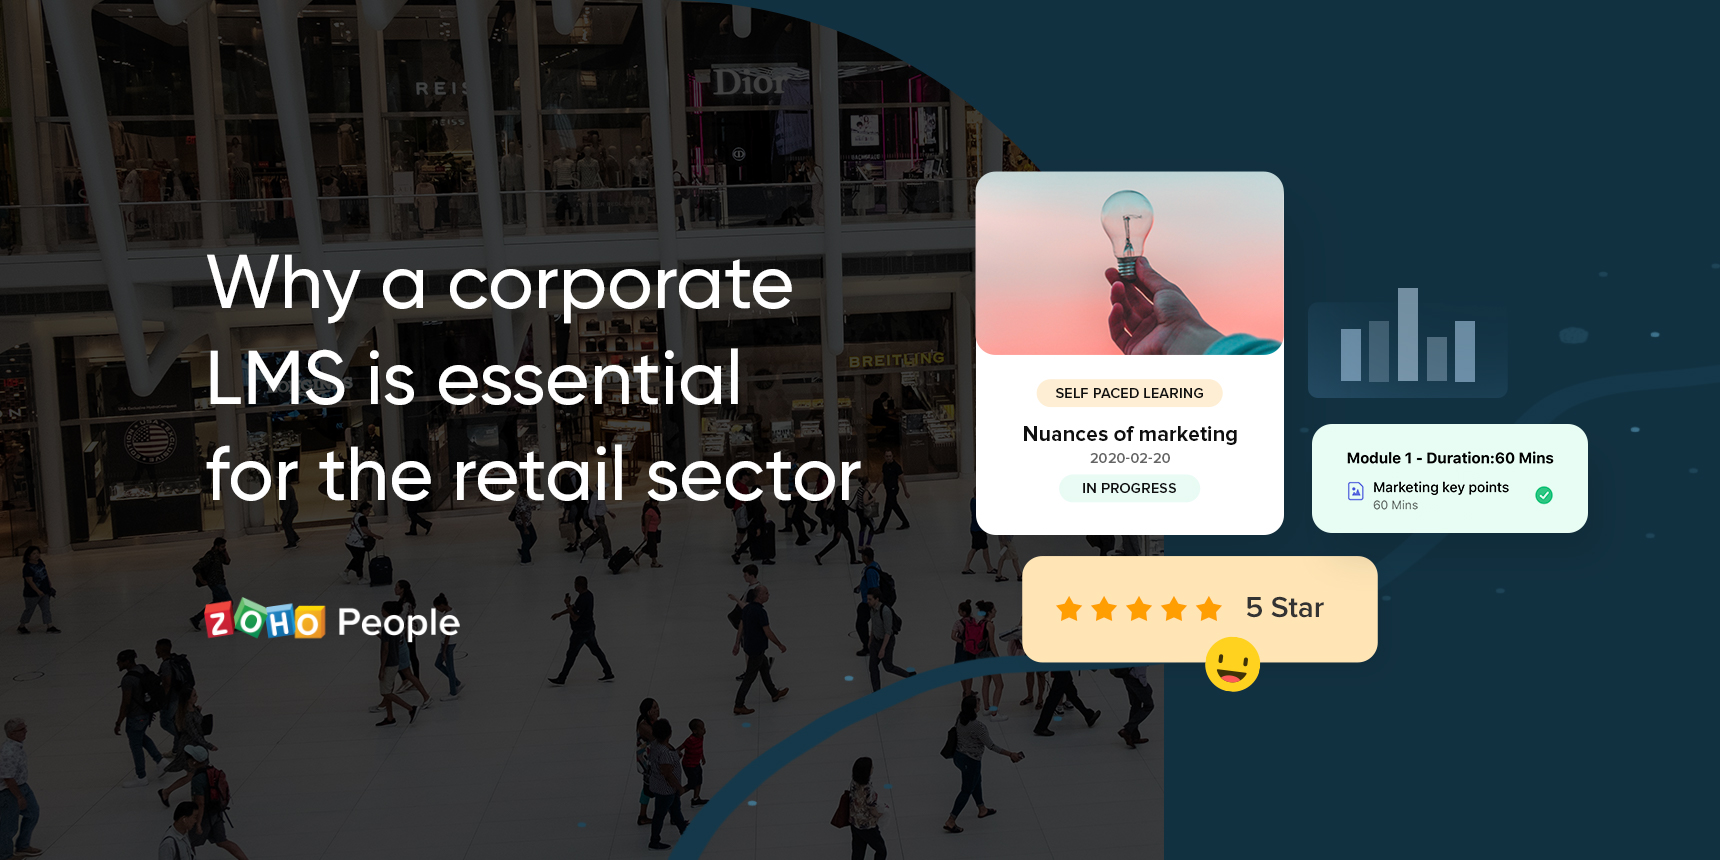 How a corporate LMS benefits the retail sector